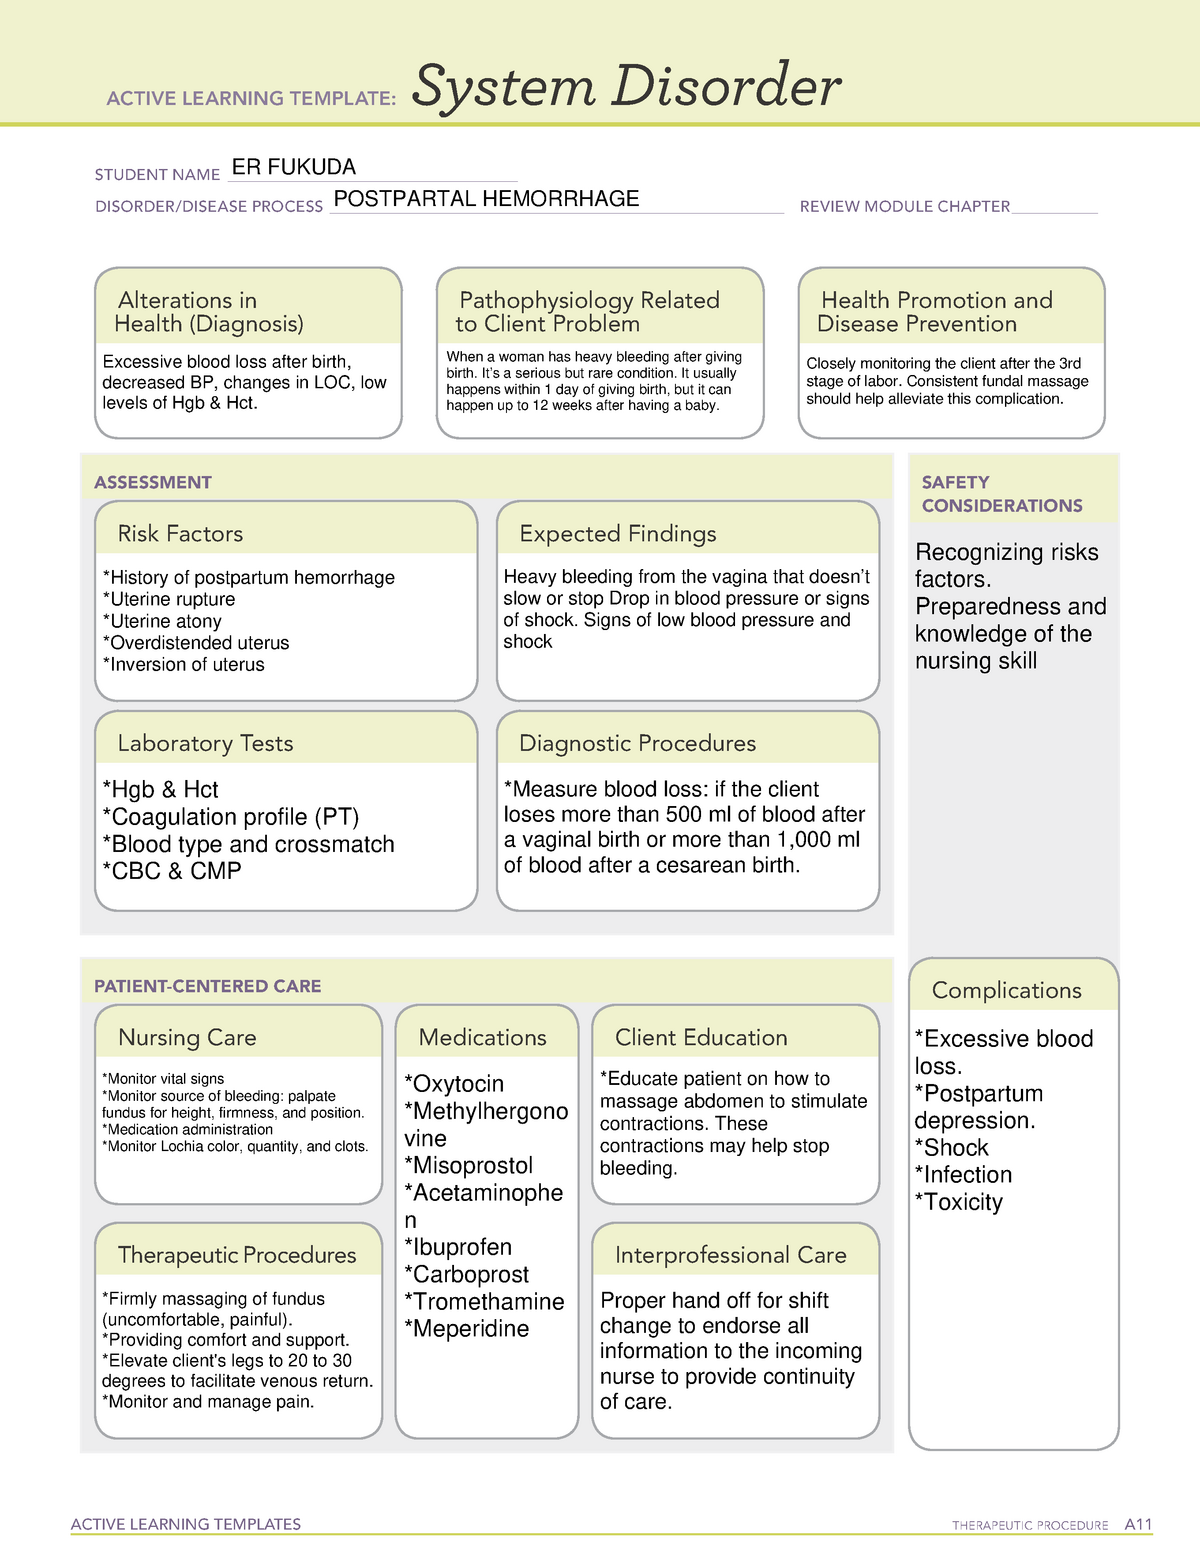 active-learning-template-diagnostic-procedure